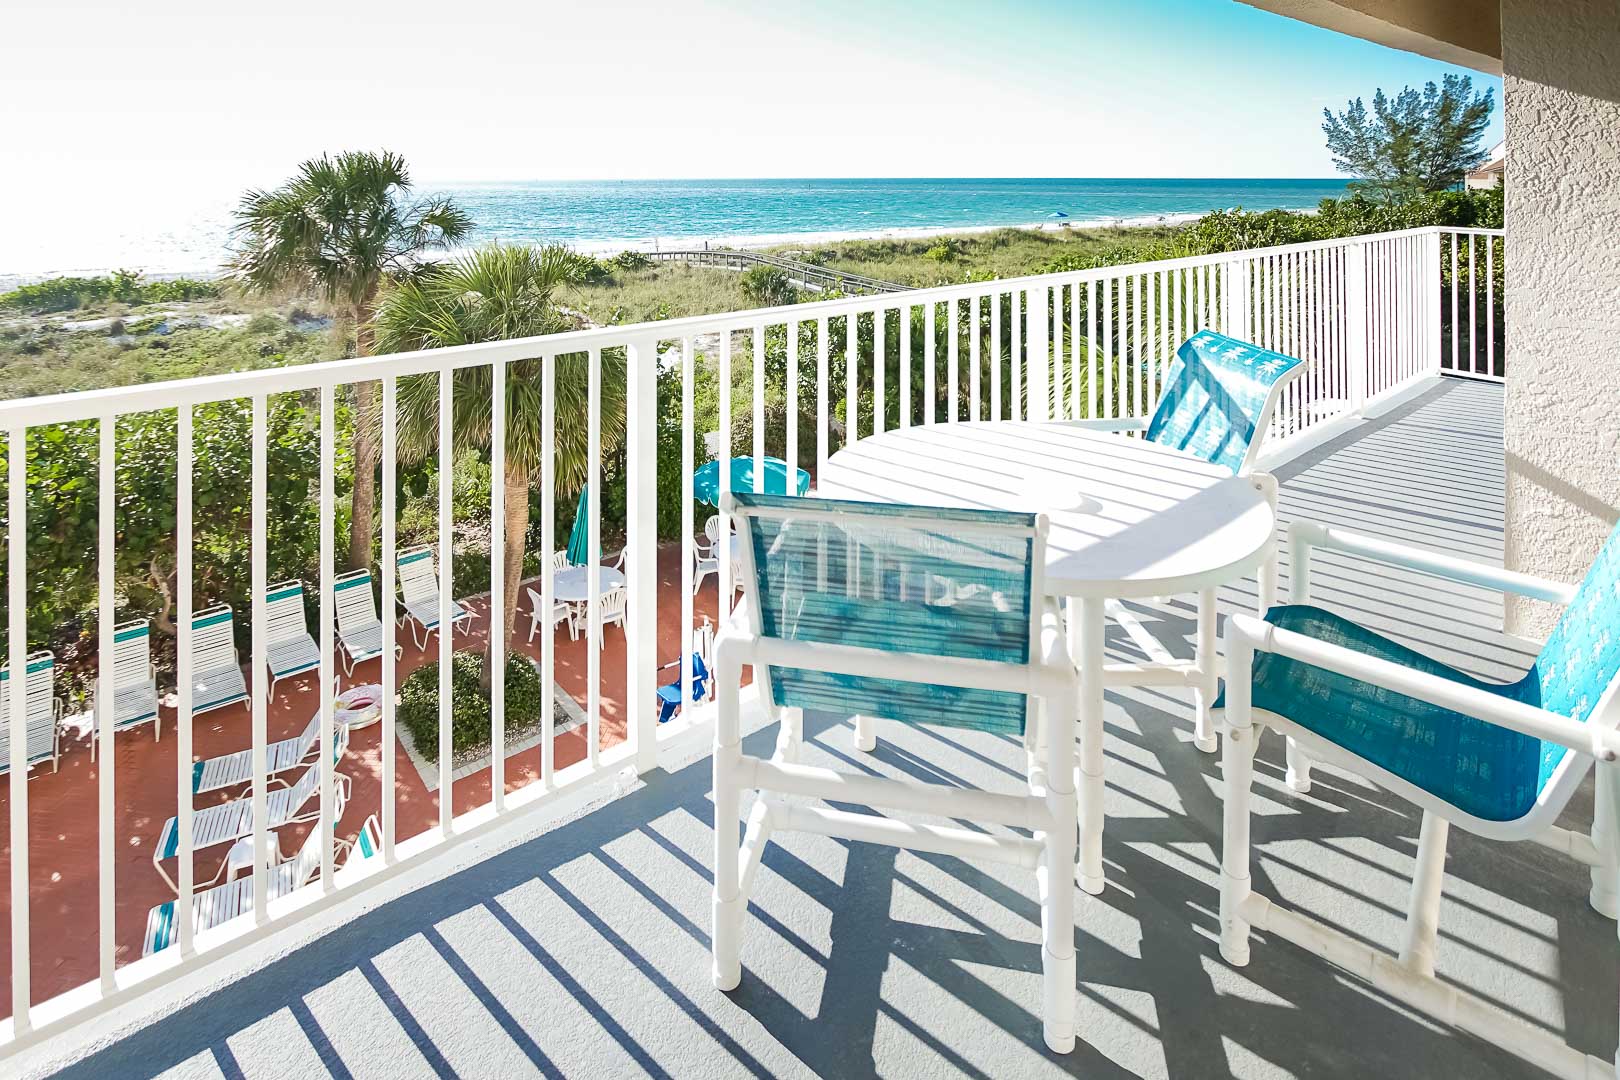 An expansive balcony with an ocean view at VRI's Sand Pebble Resort in Treasure Island, Florida.